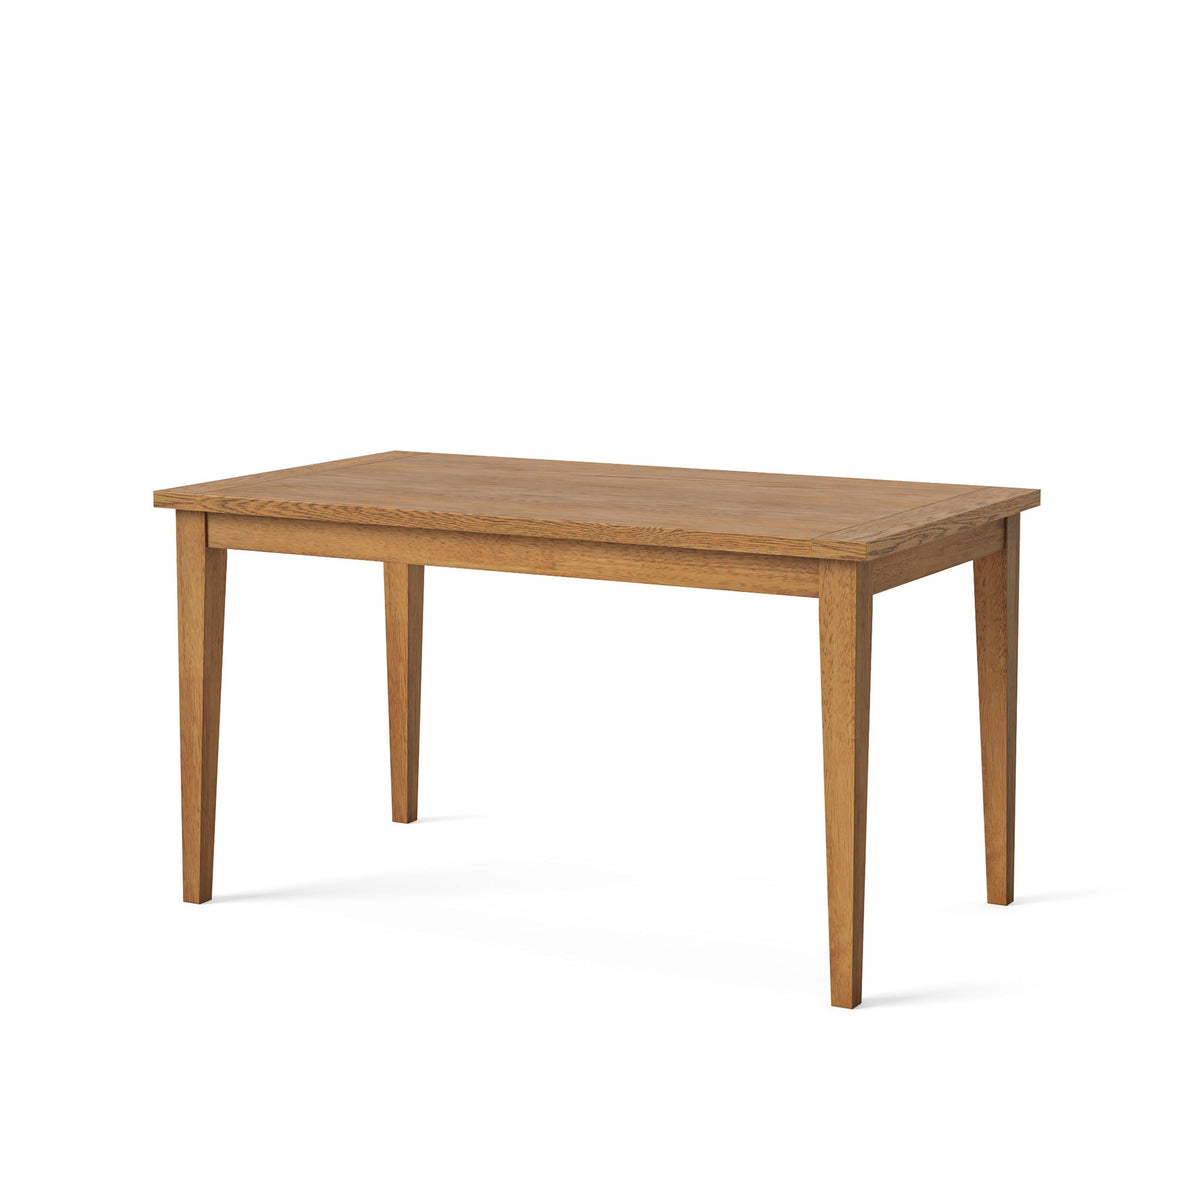 Fran Oak Wooden 120cm 4 Seater Dining Table